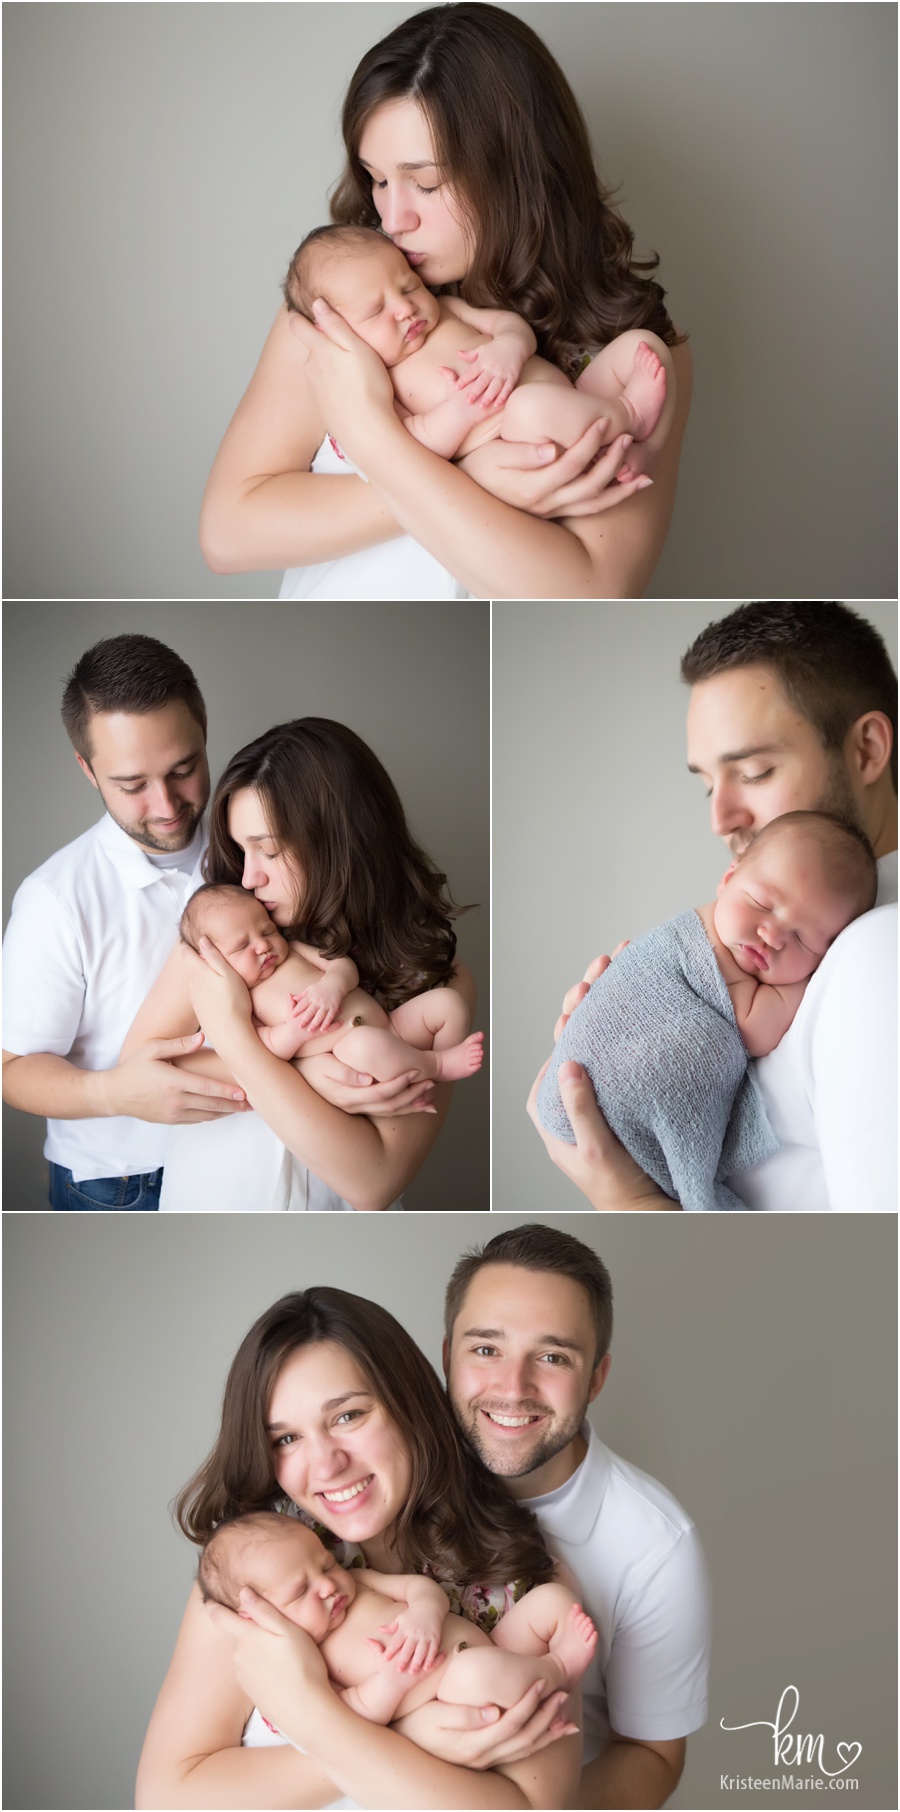 Family with newborn baby - newborn photography family poses 